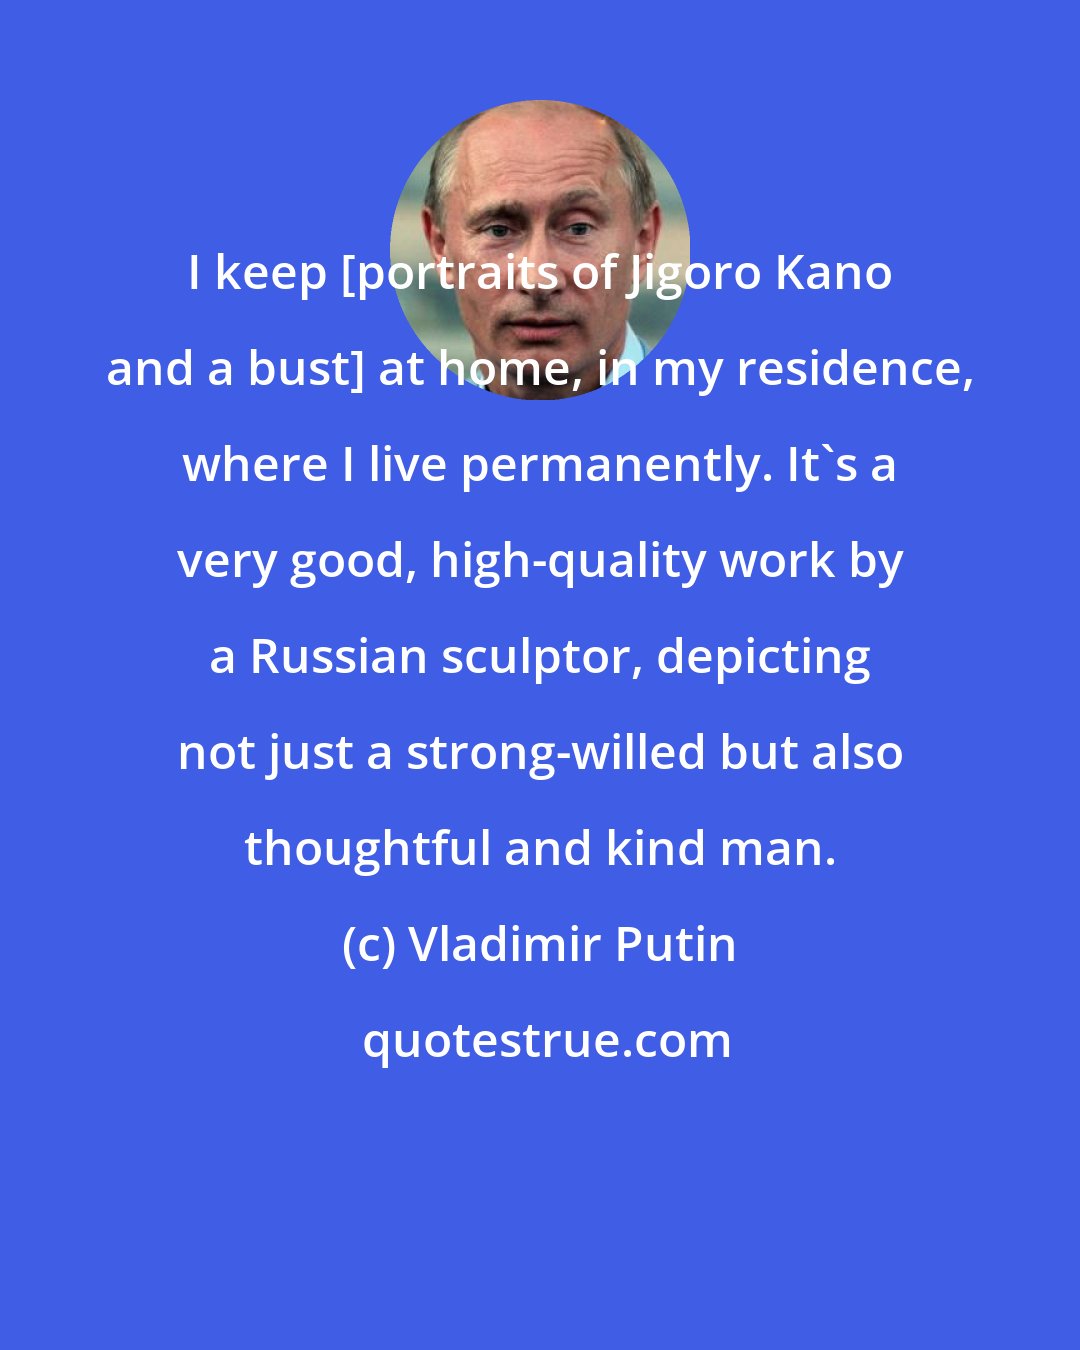 Vladimir Putin: I keep [portraits of Jigoro Kano and a bust] at home, in my residence, where I live permanently. It's a very good, high-quality work by a Russian sculptor, depicting not just a strong-willed but also thoughtful and kind man.